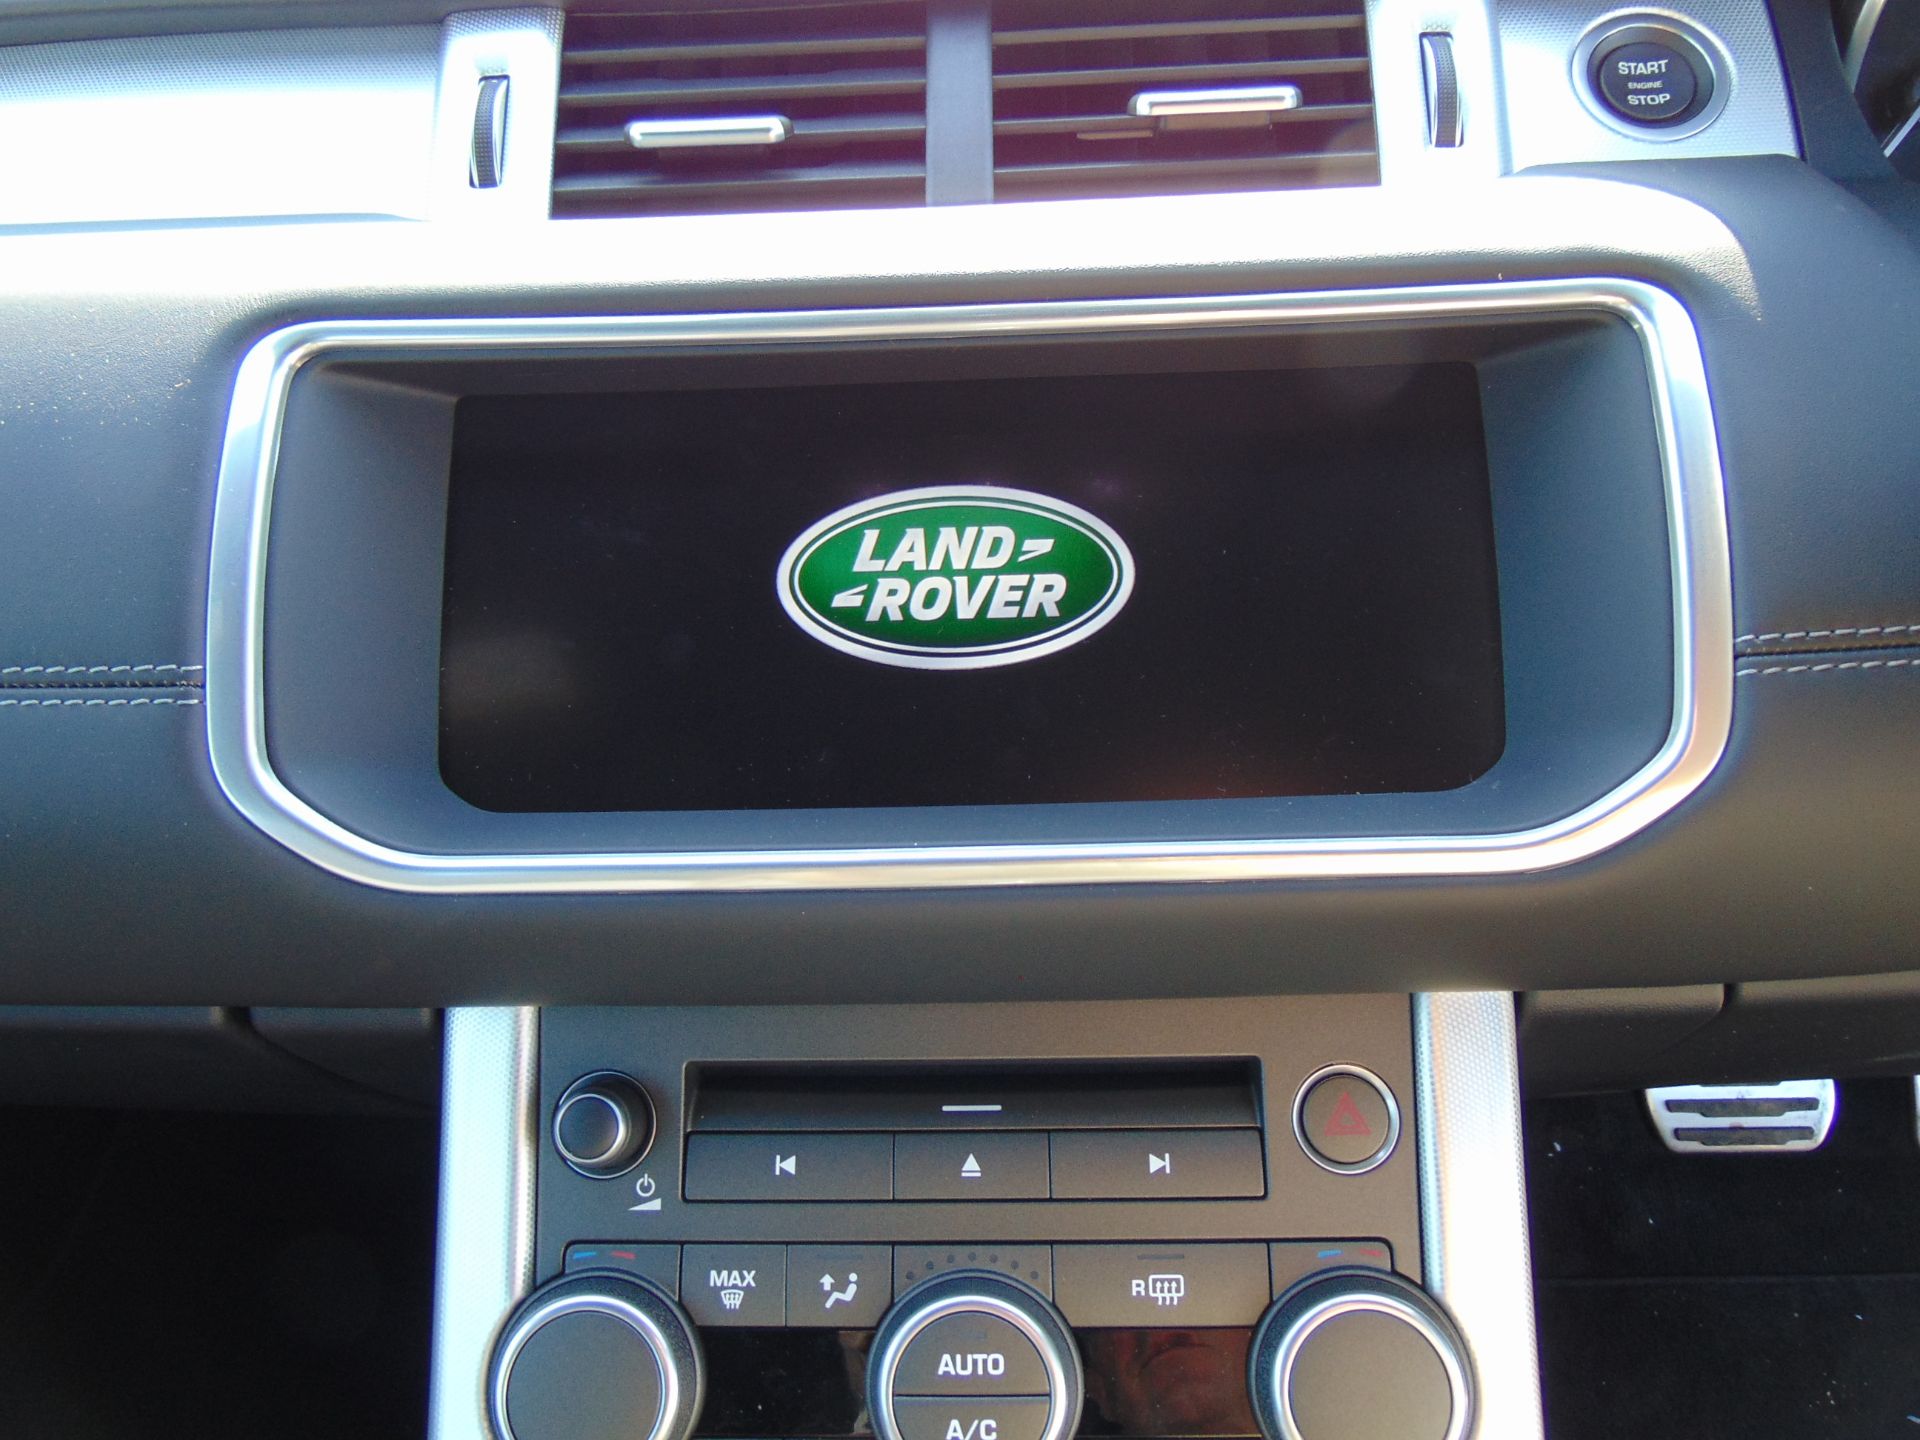 NEW UNUSED Range Rover Evoque 2.0 i4 HSE Dynamic Convertible - Image 23 of 39